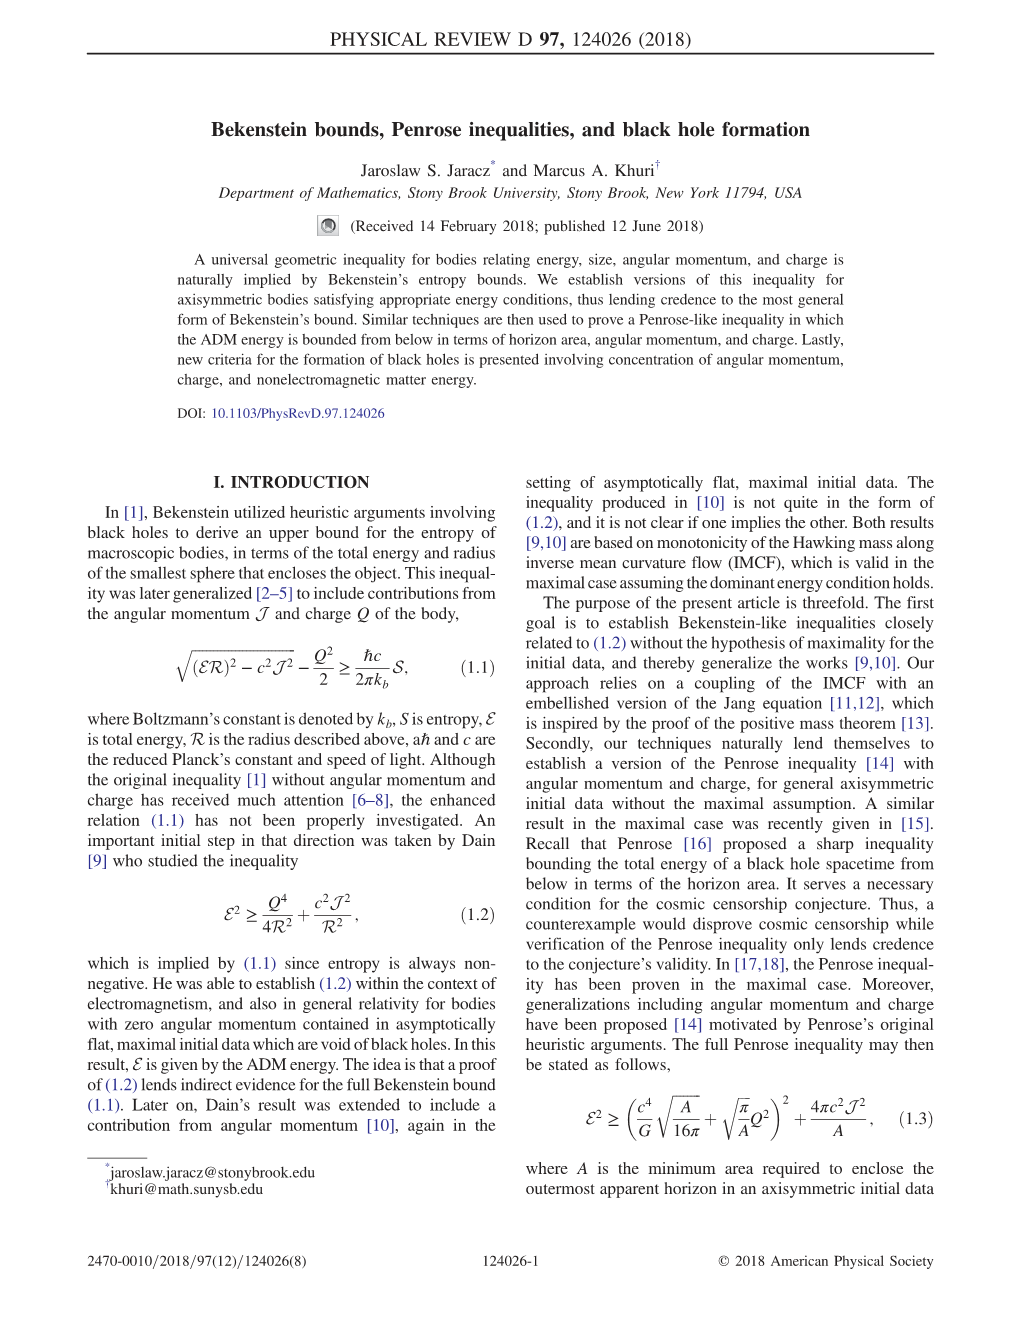 Bekenstein Bounds, Penrose Inequalities, and Black Hole Formation